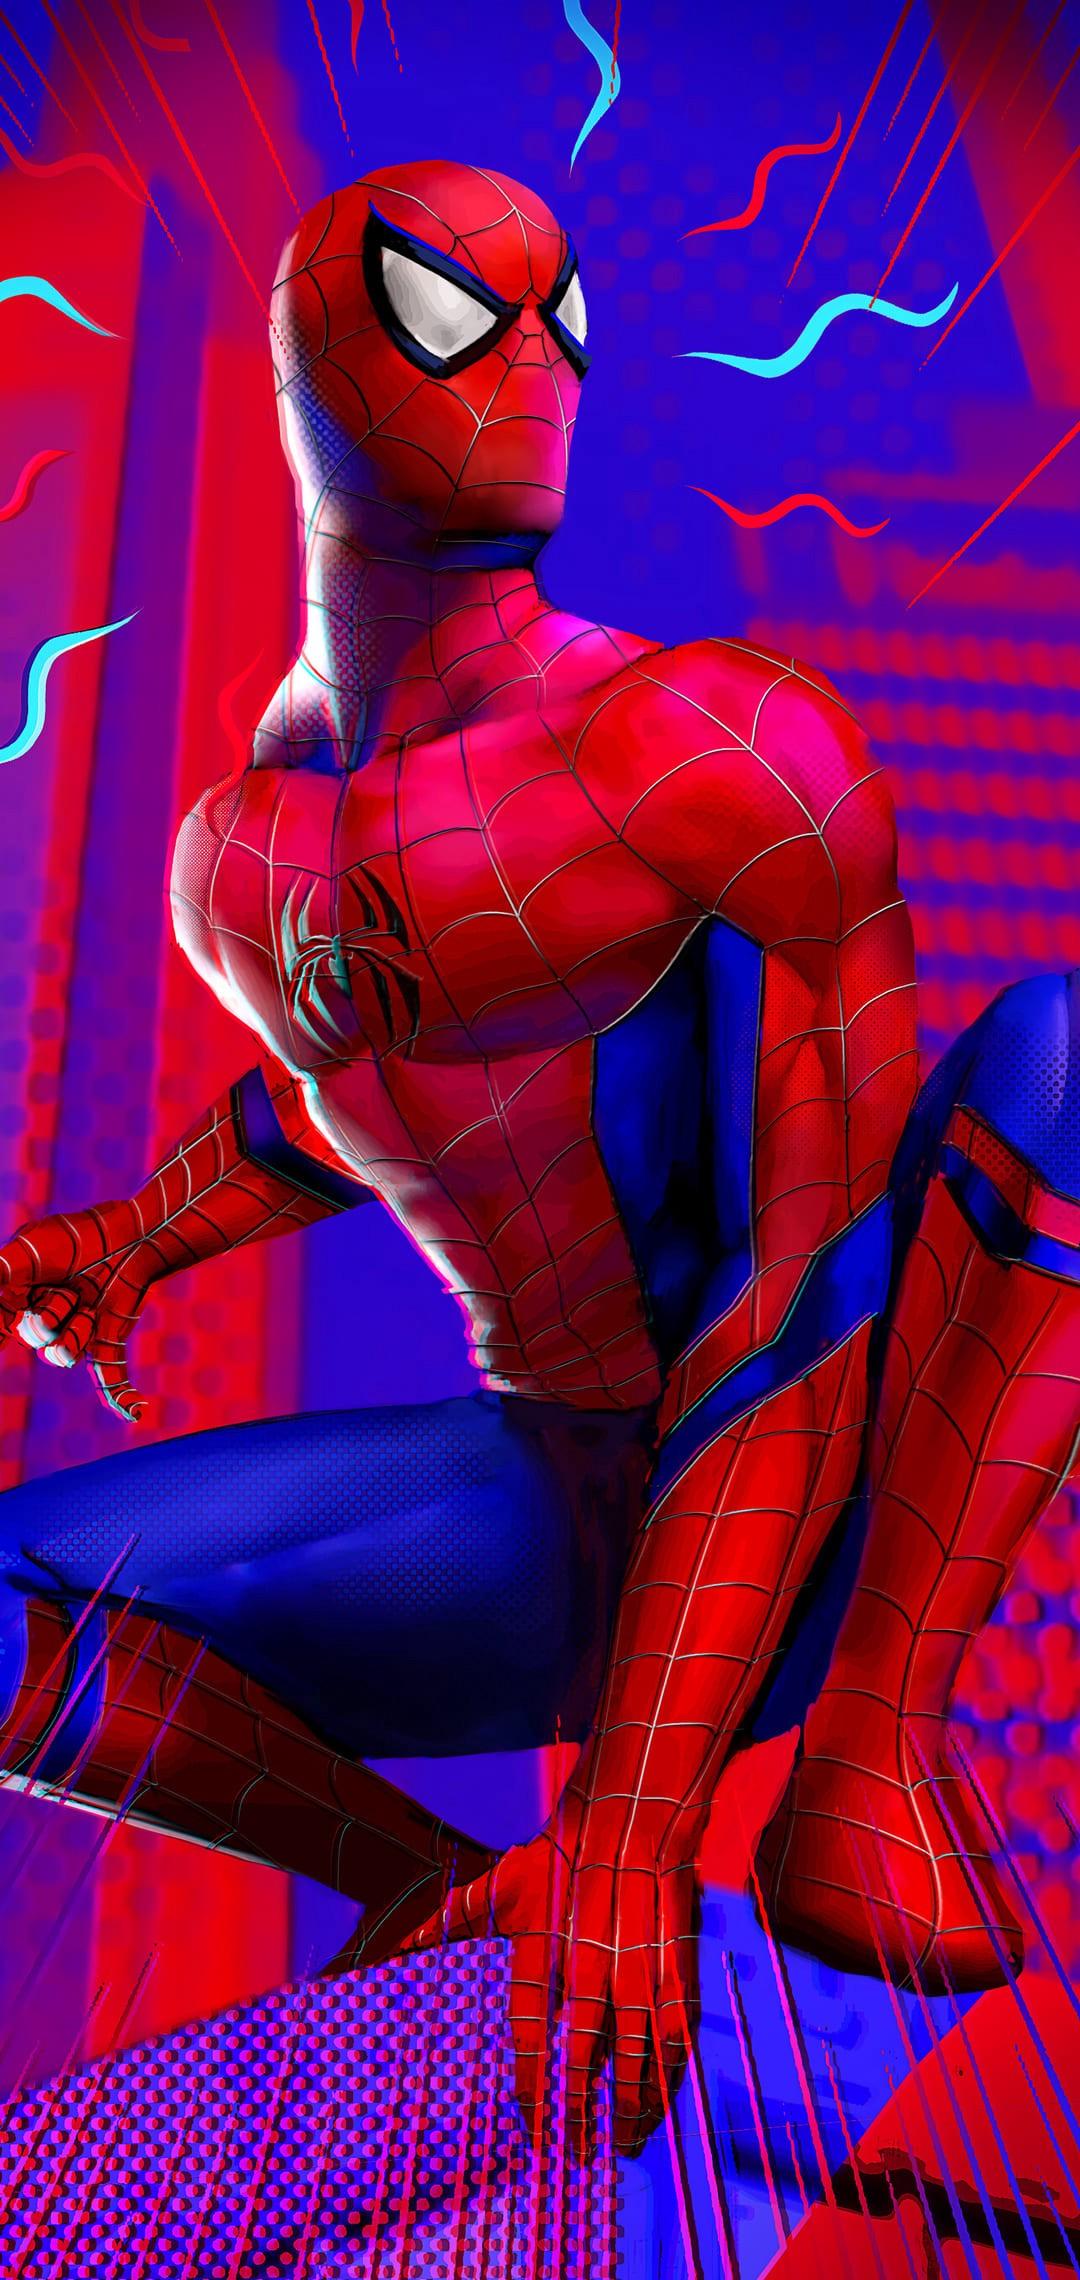 1080 x 2280 · jpeg - Best Spider Man Wallpapers. In this article, we divide the... | by Getty ...